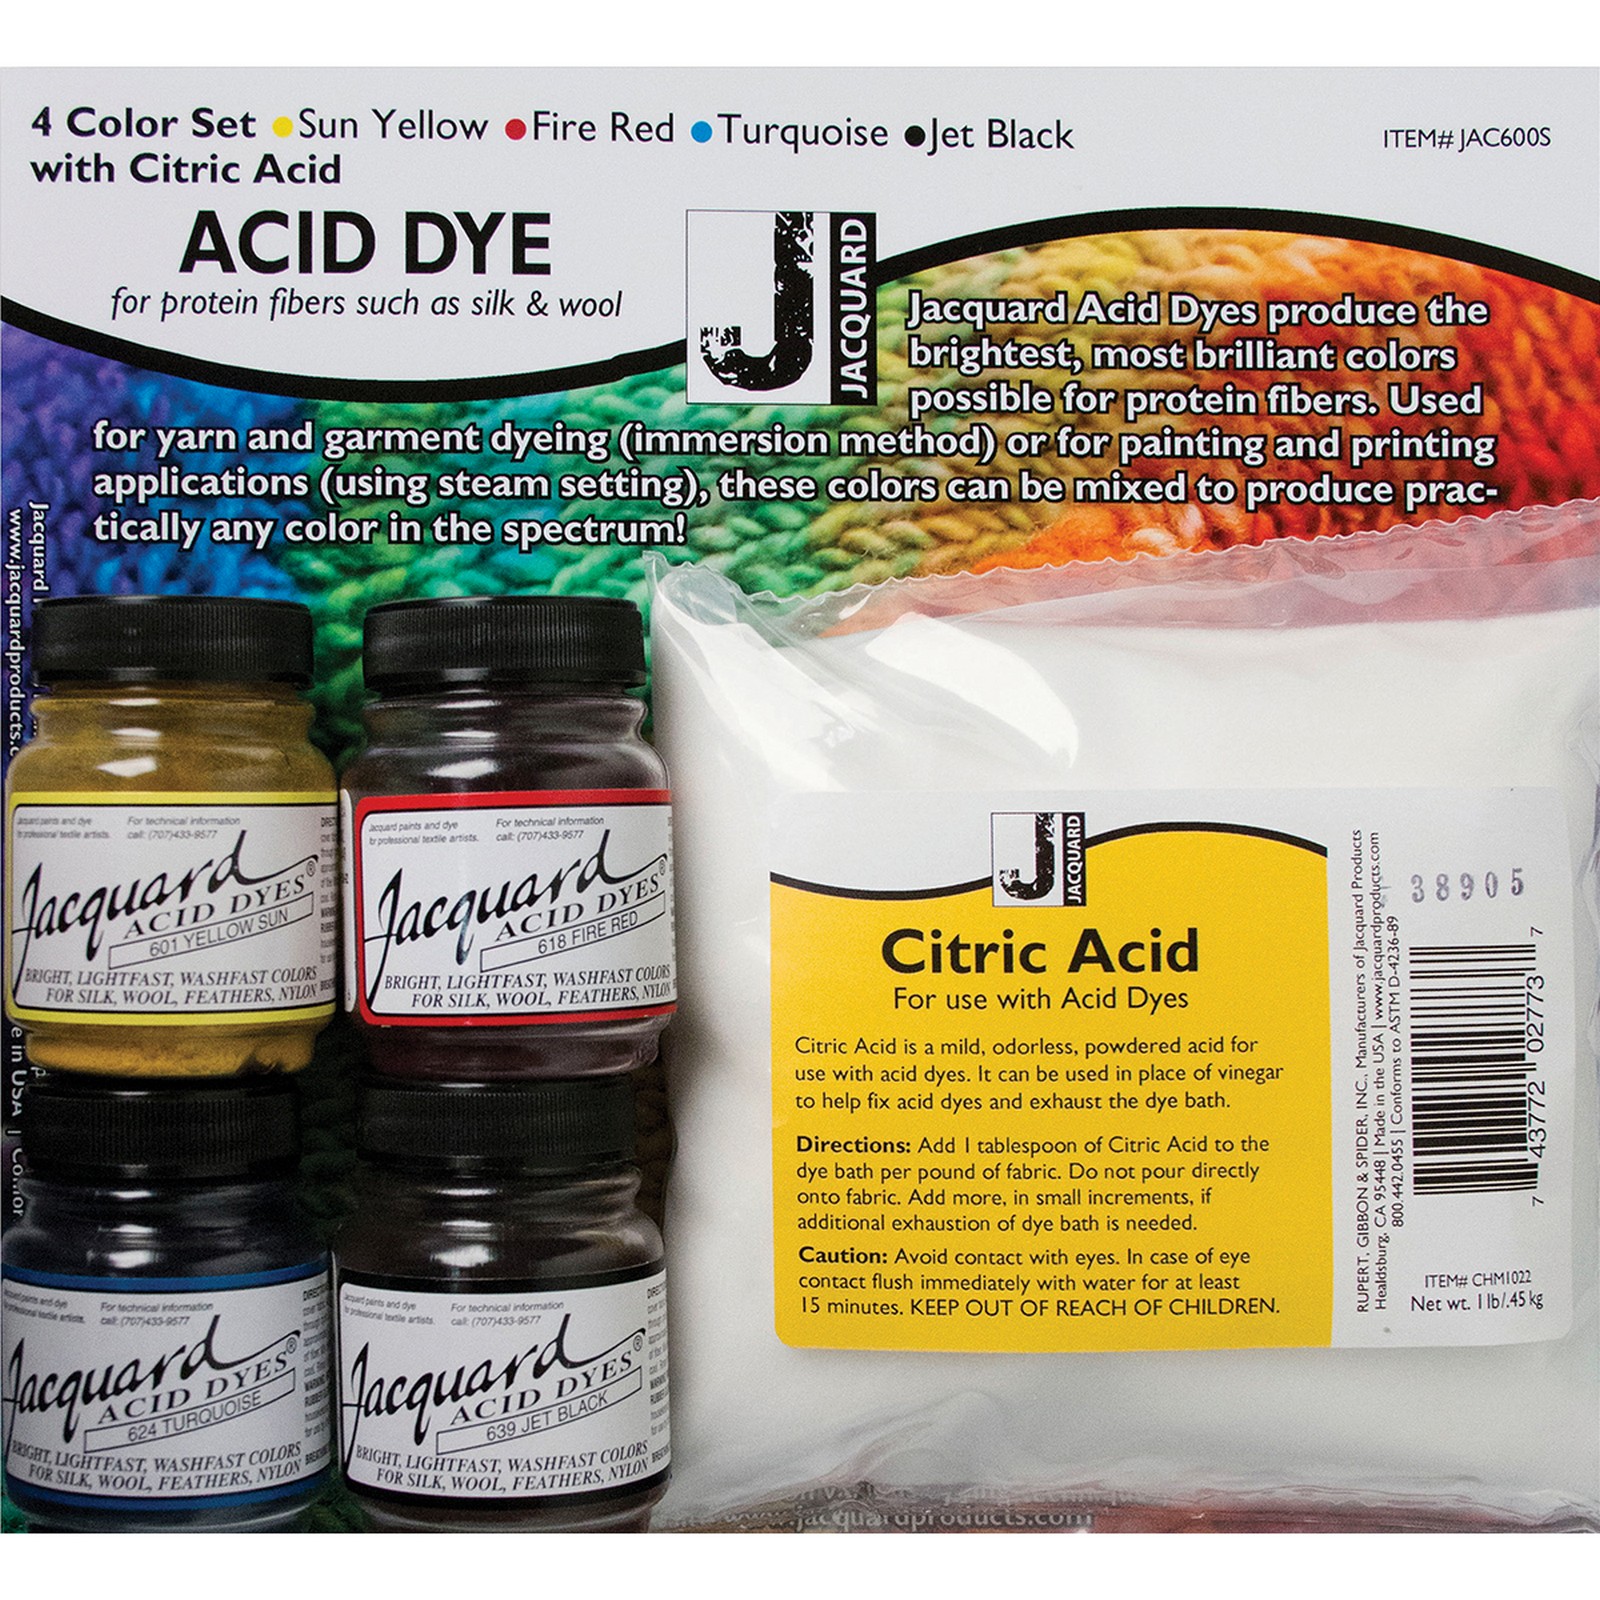 Can vinegar be used to set dye?